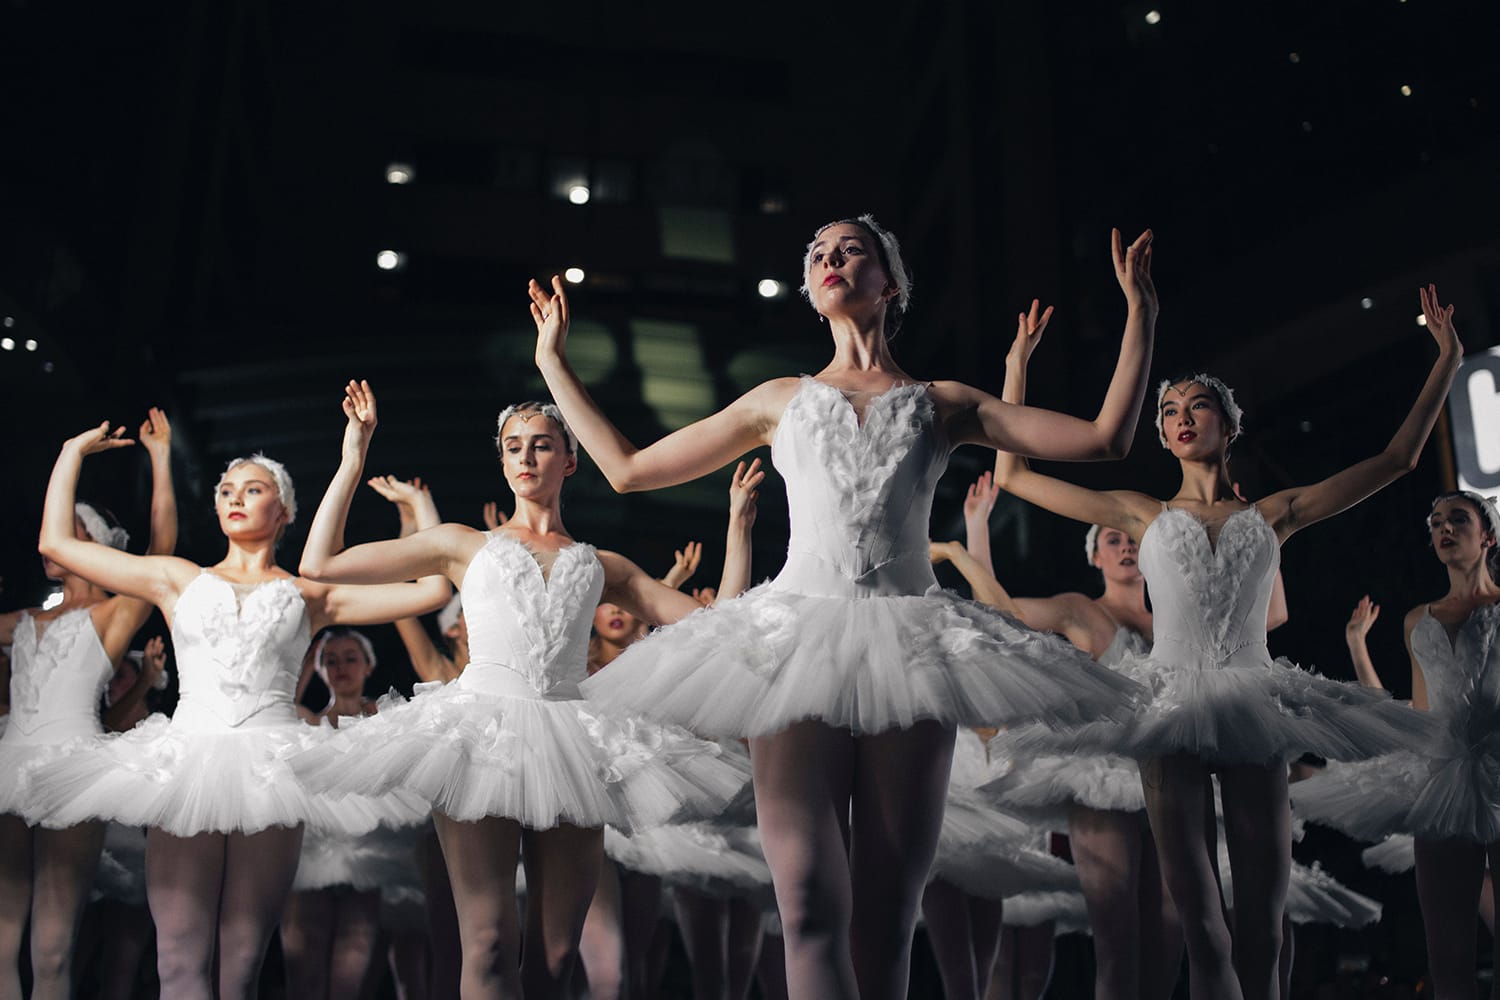 Tips & Tricks For Getting Started With Ballet Photography